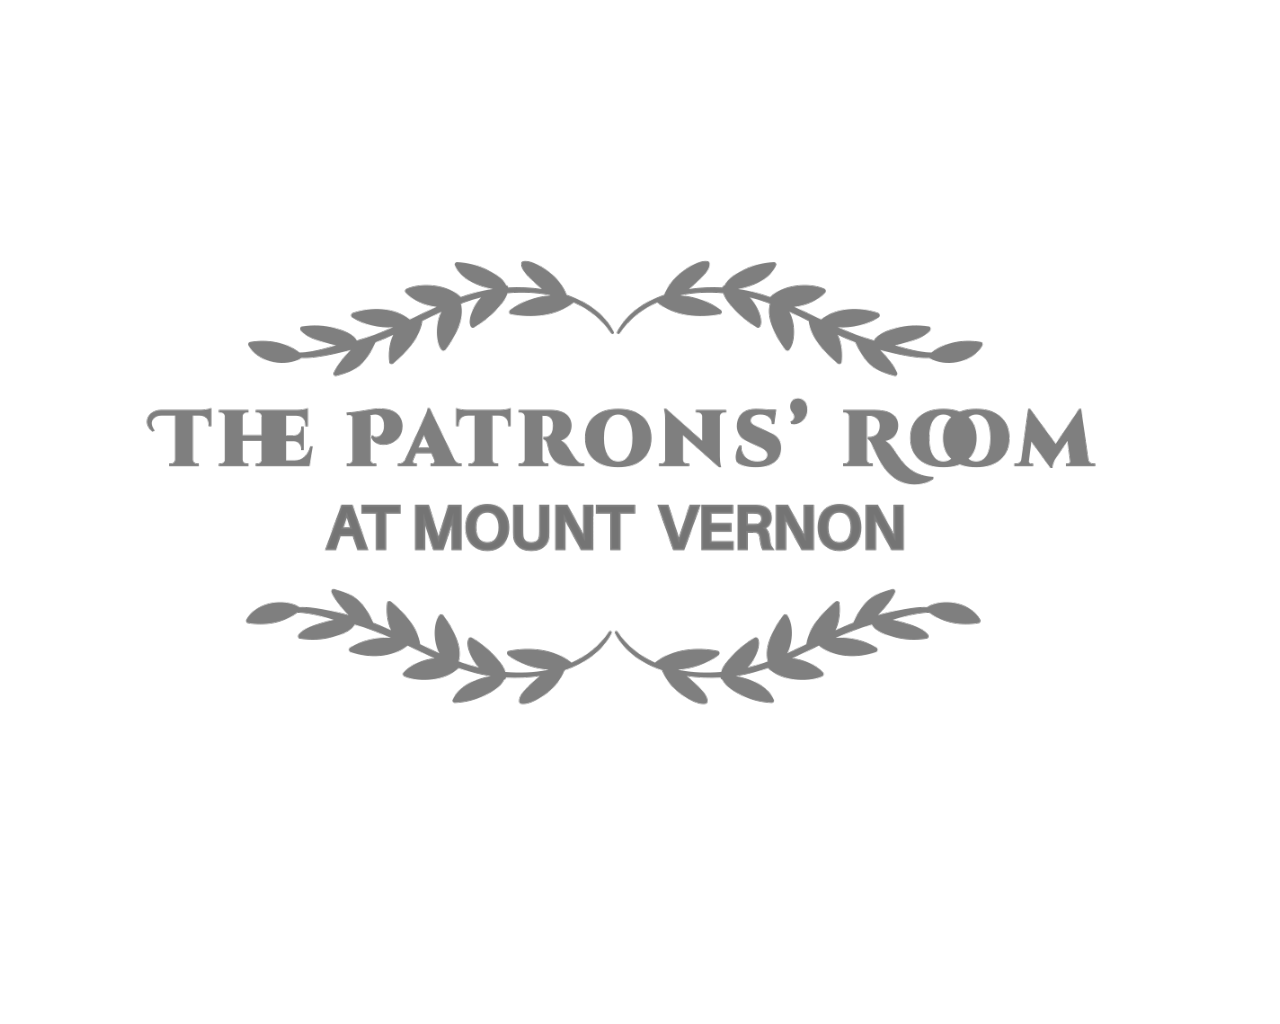 The Patrons’ Room's logo